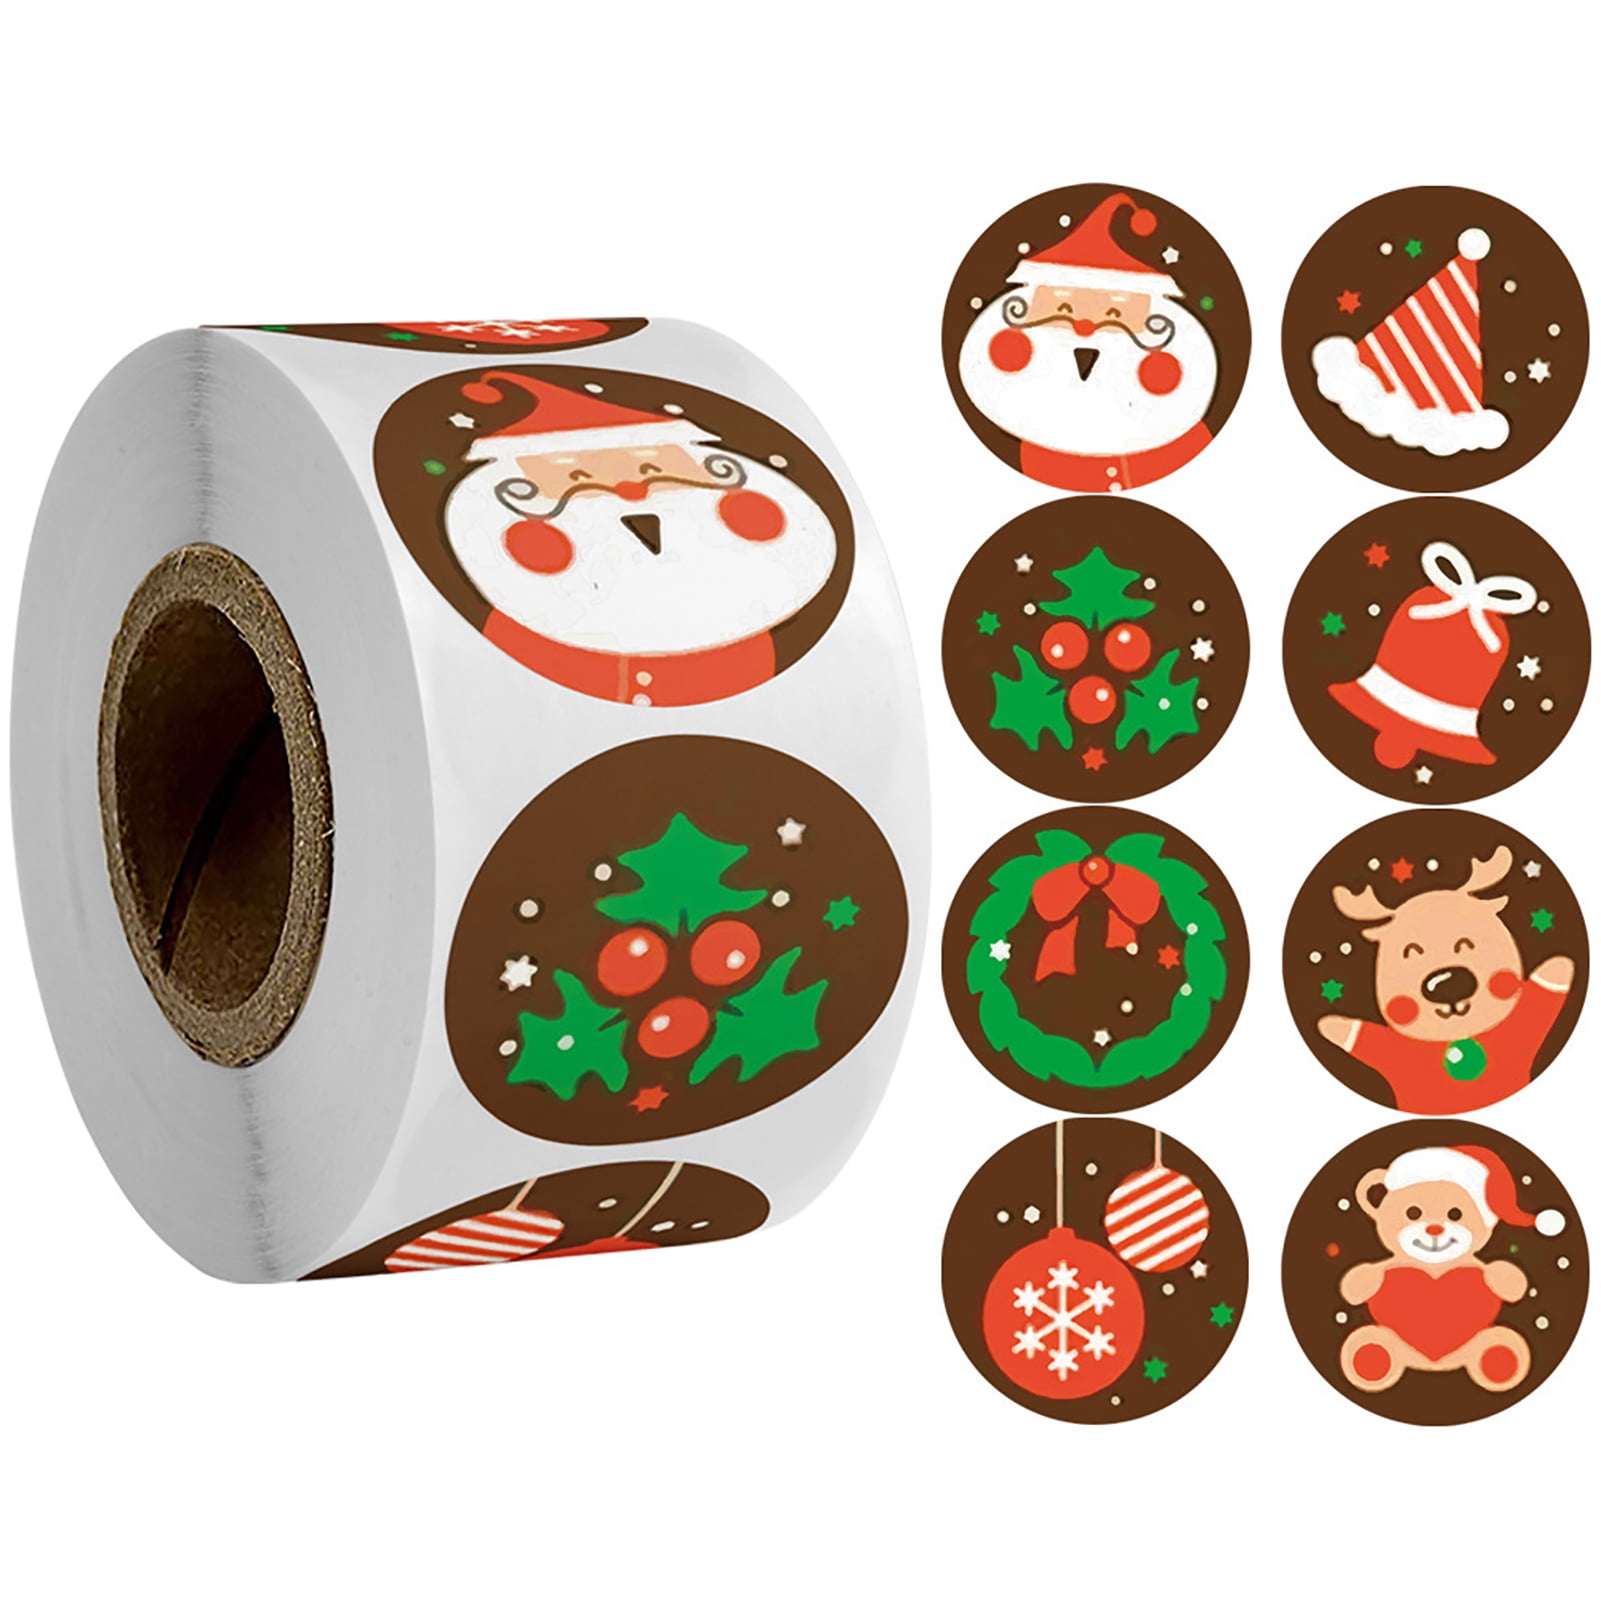 3000 Pieces Christmas Stickers Roll 1 Inch Winter Holiday Stickers Round Xmas Label Tag for Envelope Present Boxes Decorative Sealing Multiple Designs 